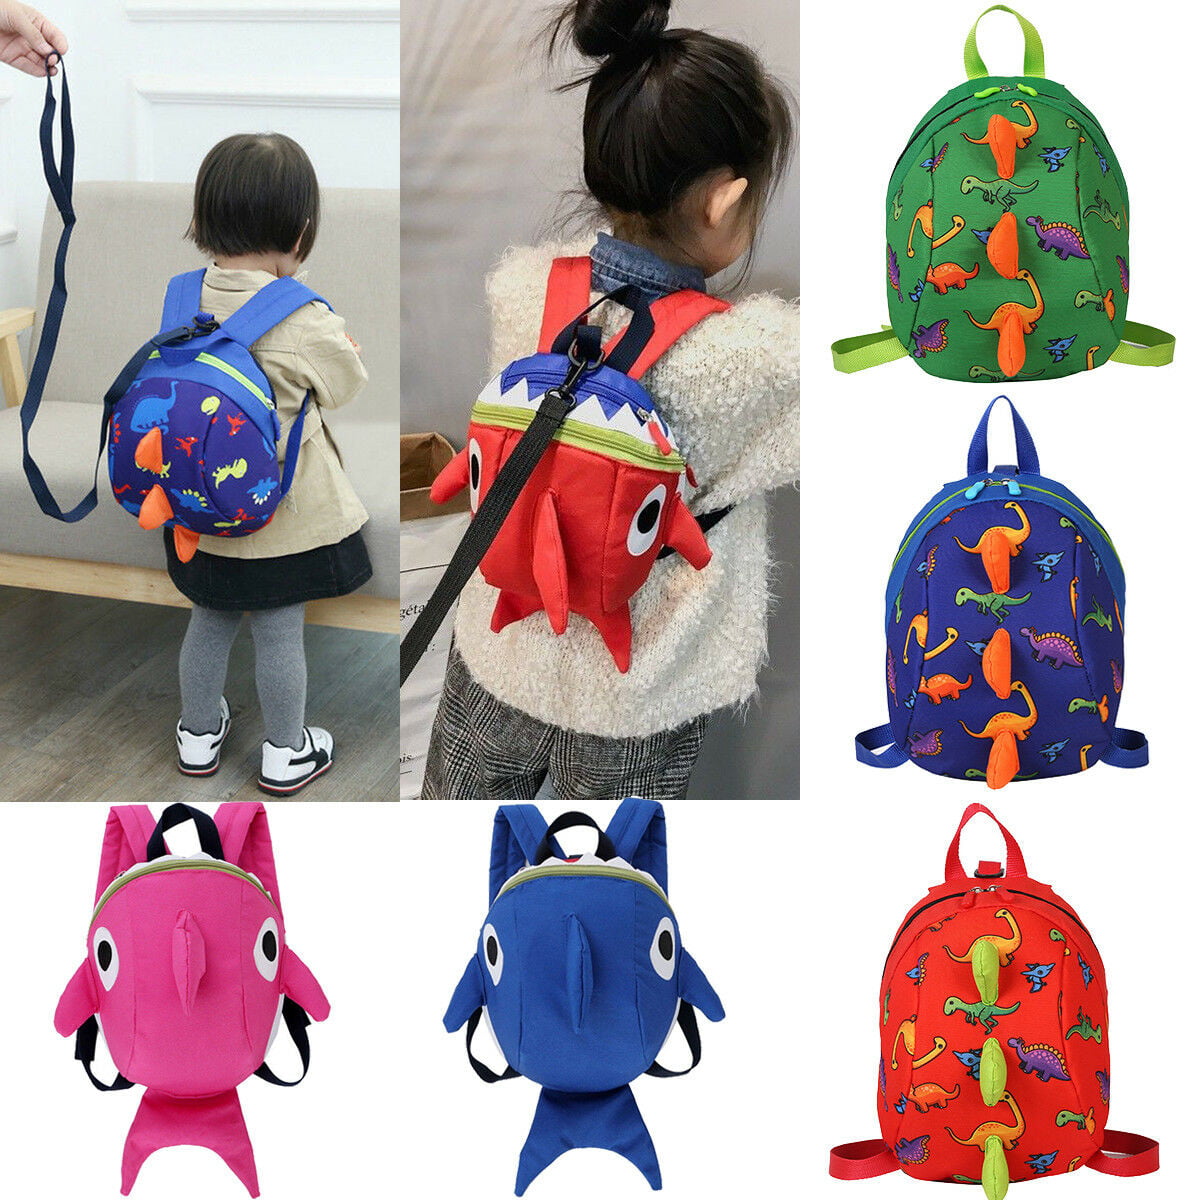 Safety Harness Strap Baby Kid Toddler Walking Cosplay Backpack Rope Bag Gift 